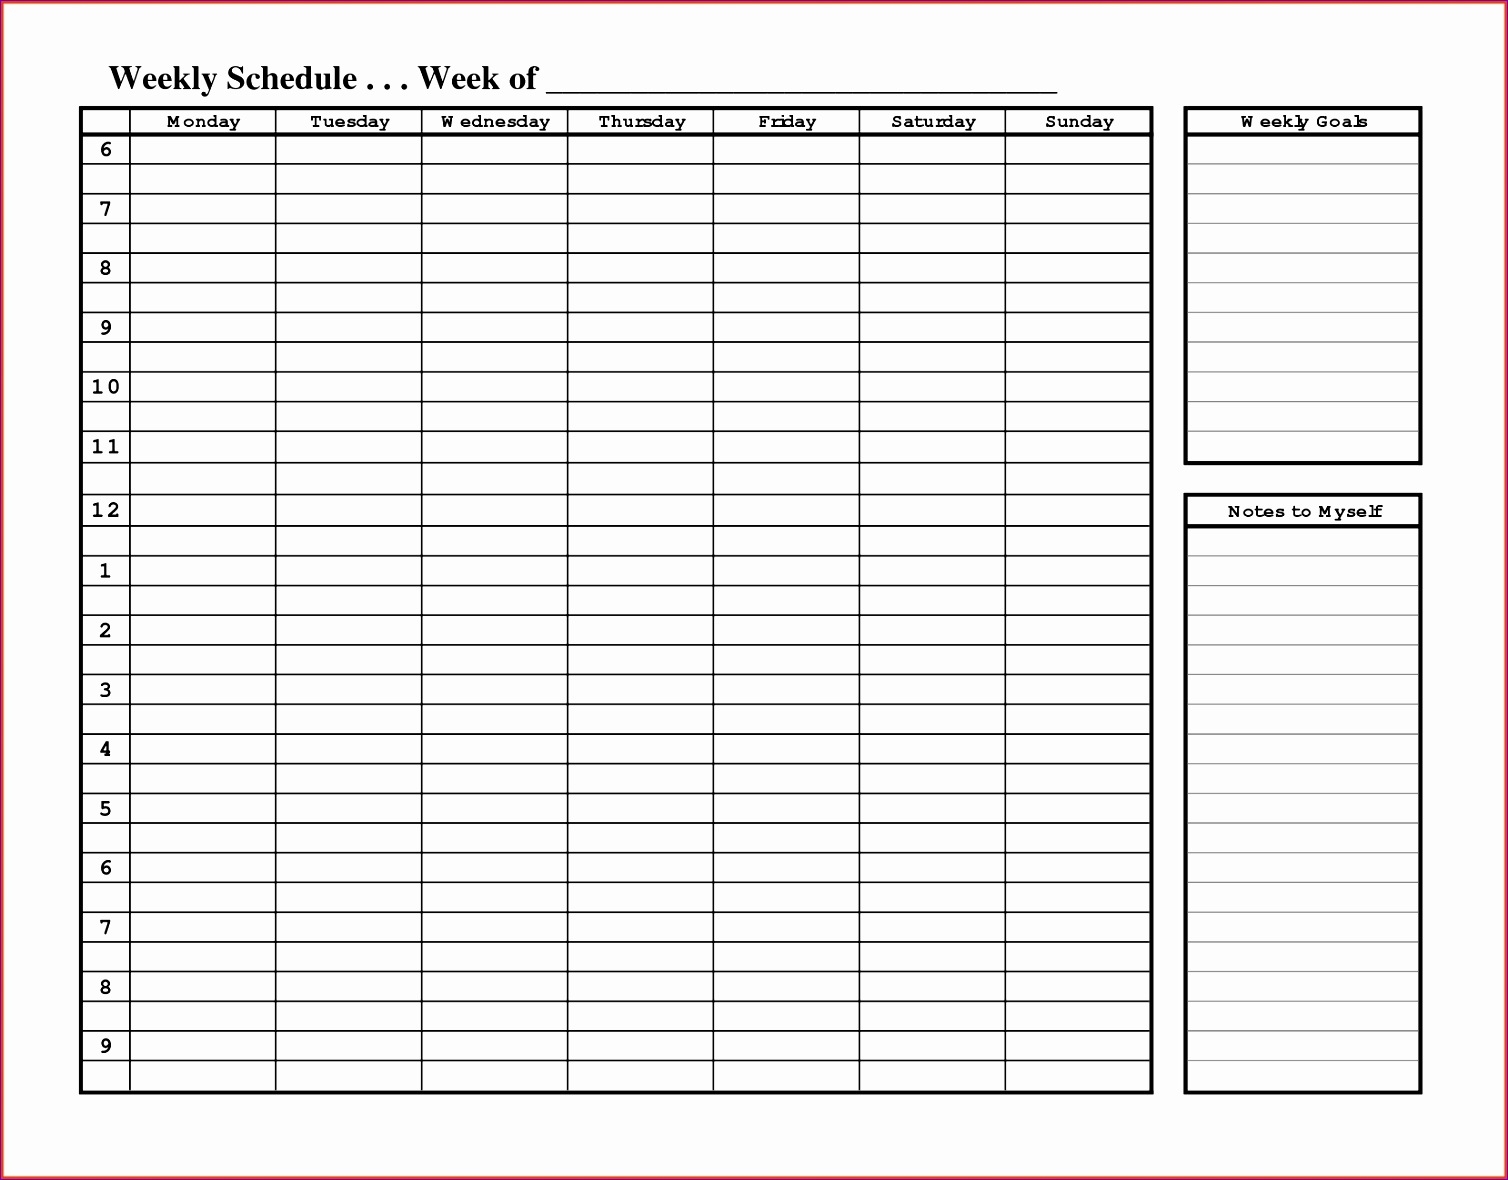 Schedule Template Daily Calendar Rintable Appointment Free Lanner in Free Printable Appointment Time Slots